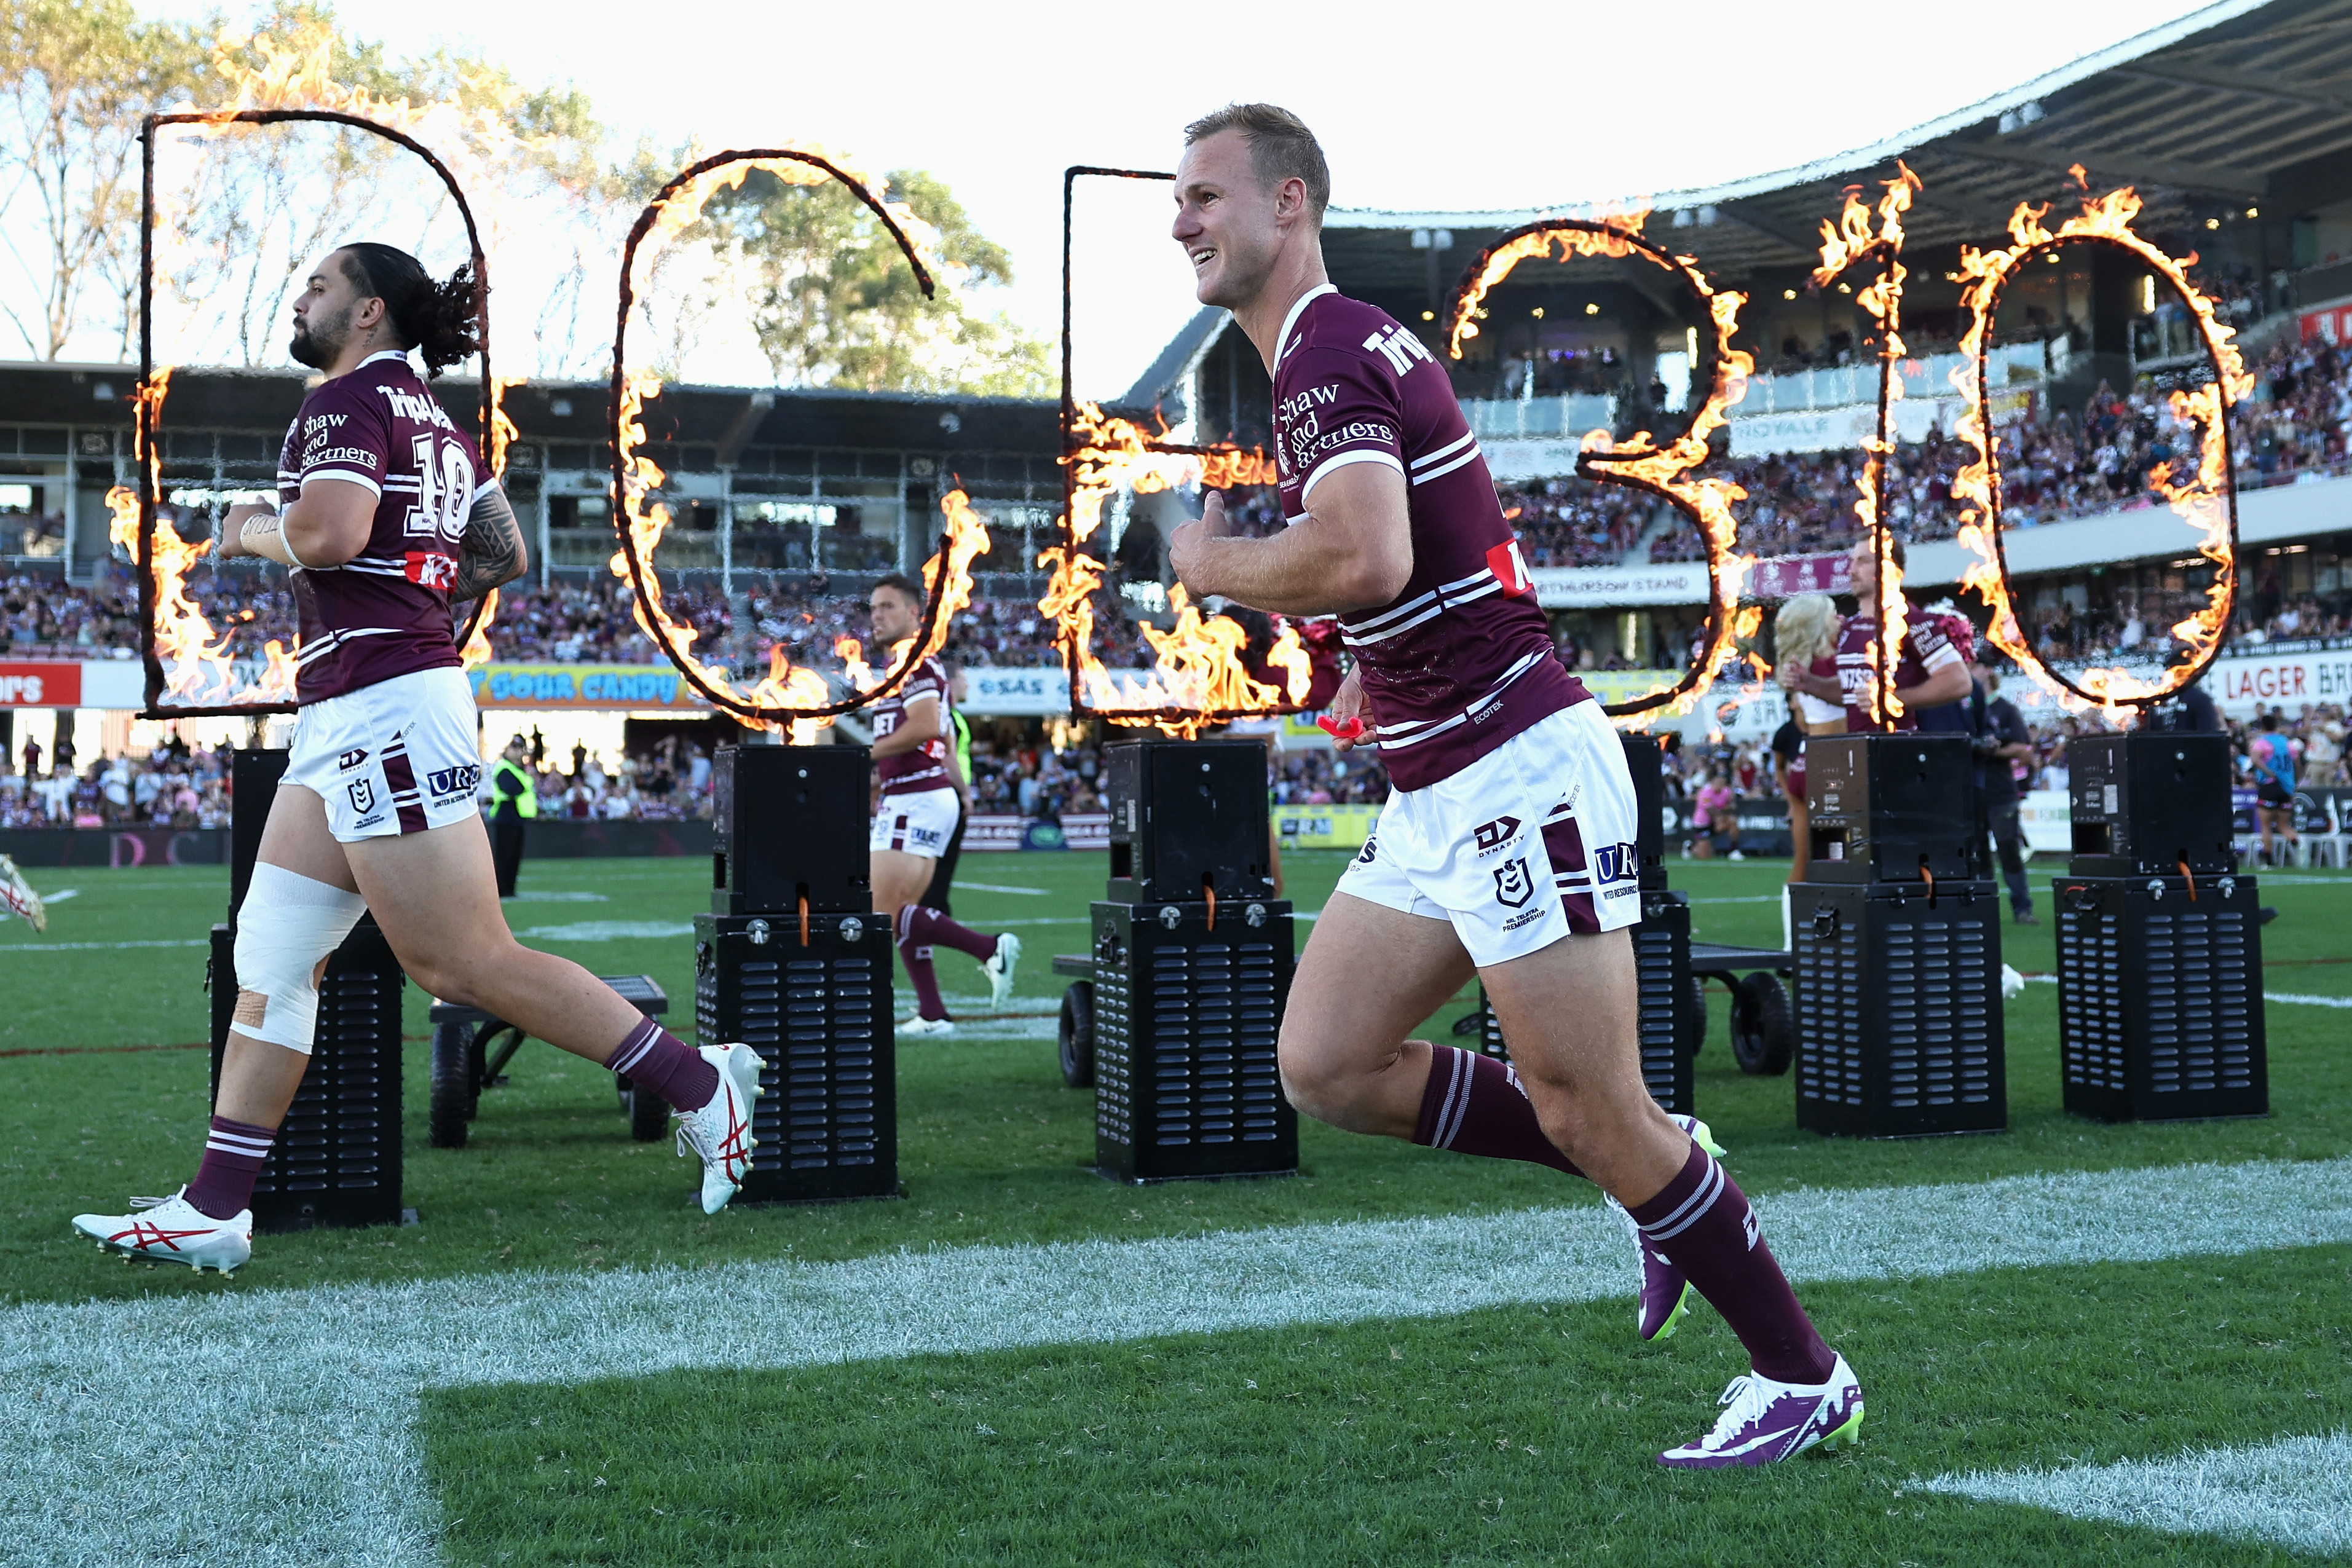 Daly Cherry-Evans runs onto the field to play his 310th game. (Photo by Cameron Spencer/Getty Images)